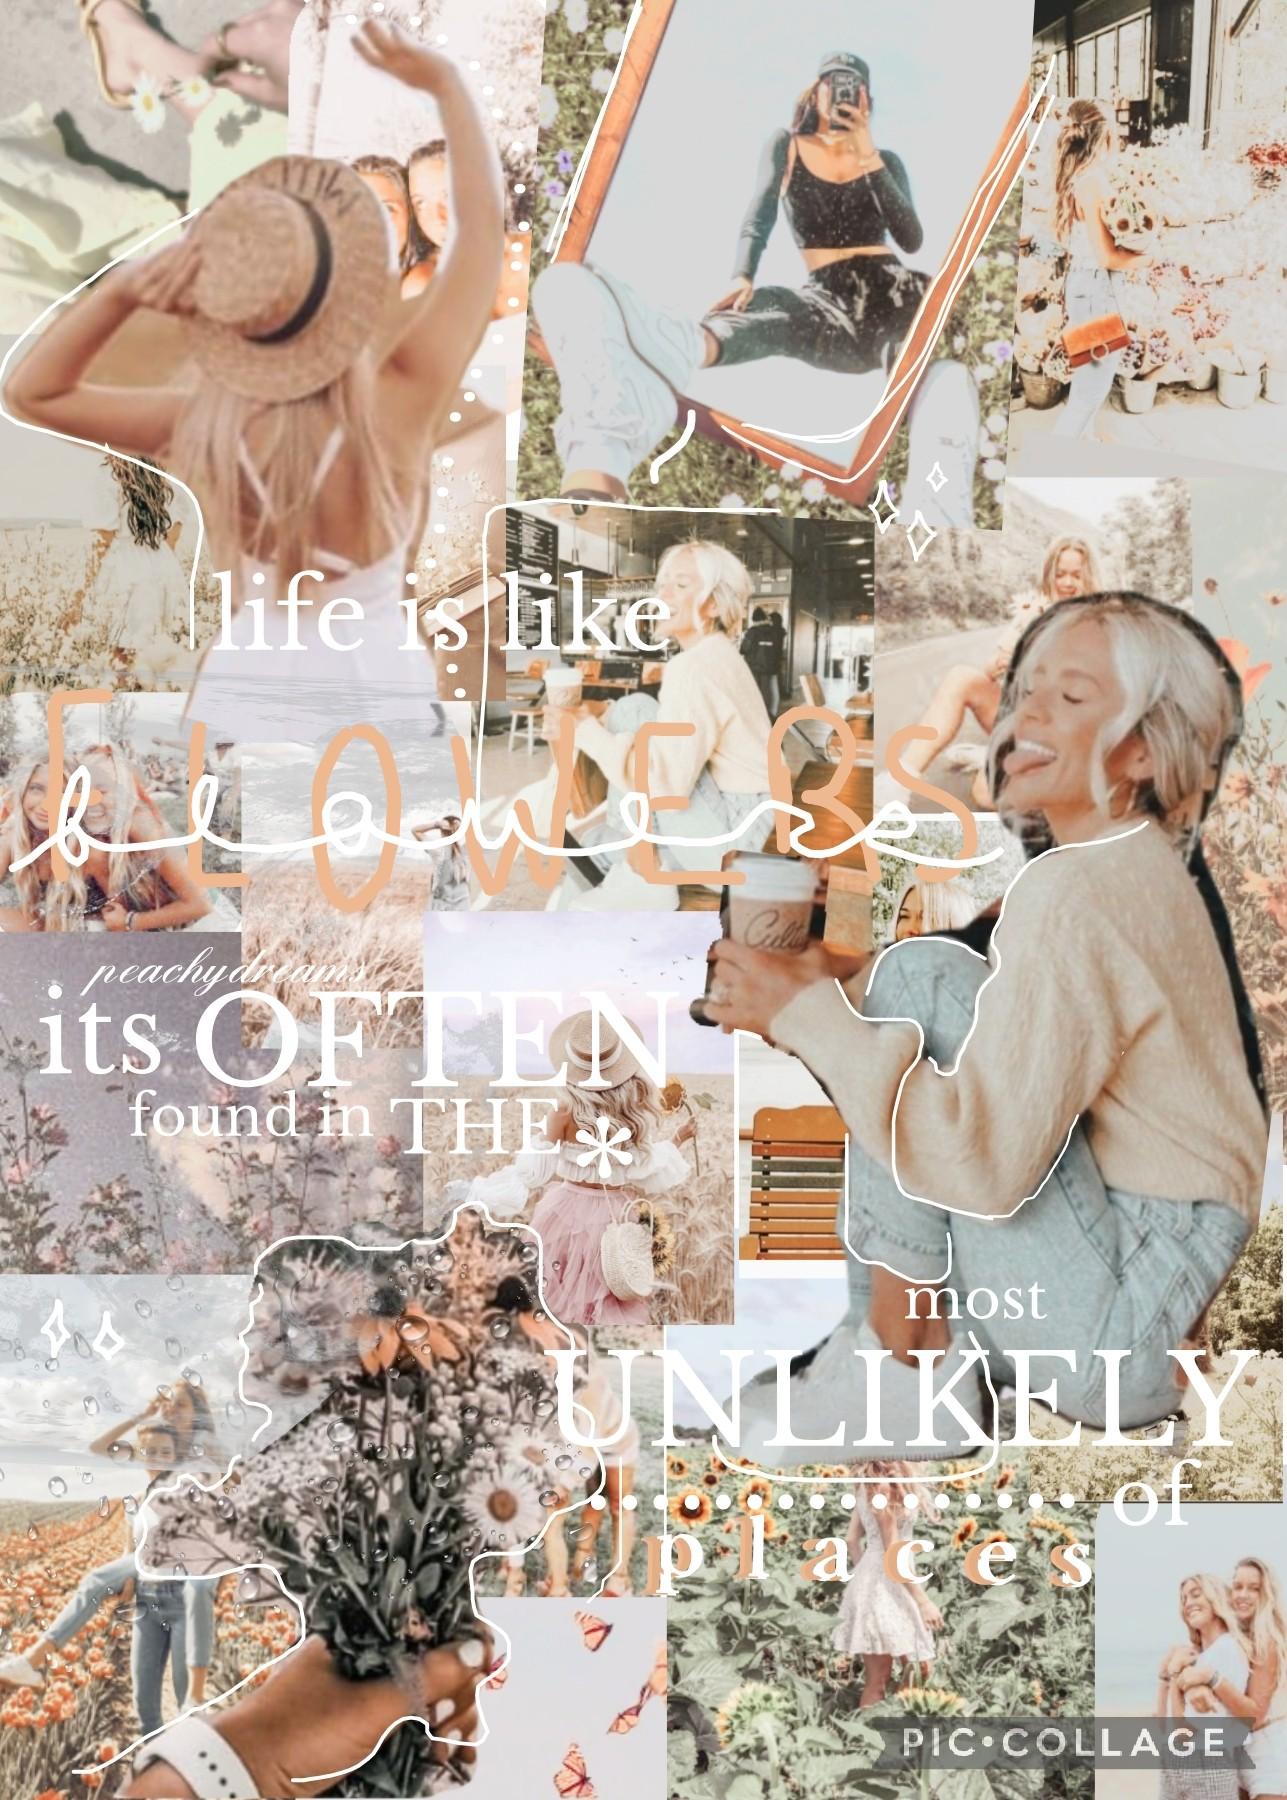 🌸2/17/2022🌸
Inspired by a collage by the one and only @wisteria-  Ya'll she is the sweetest person and SO talented!! I made this collage out of random photos i had saved and tried to make a collage when the power was out for a few hours haha i think it tu